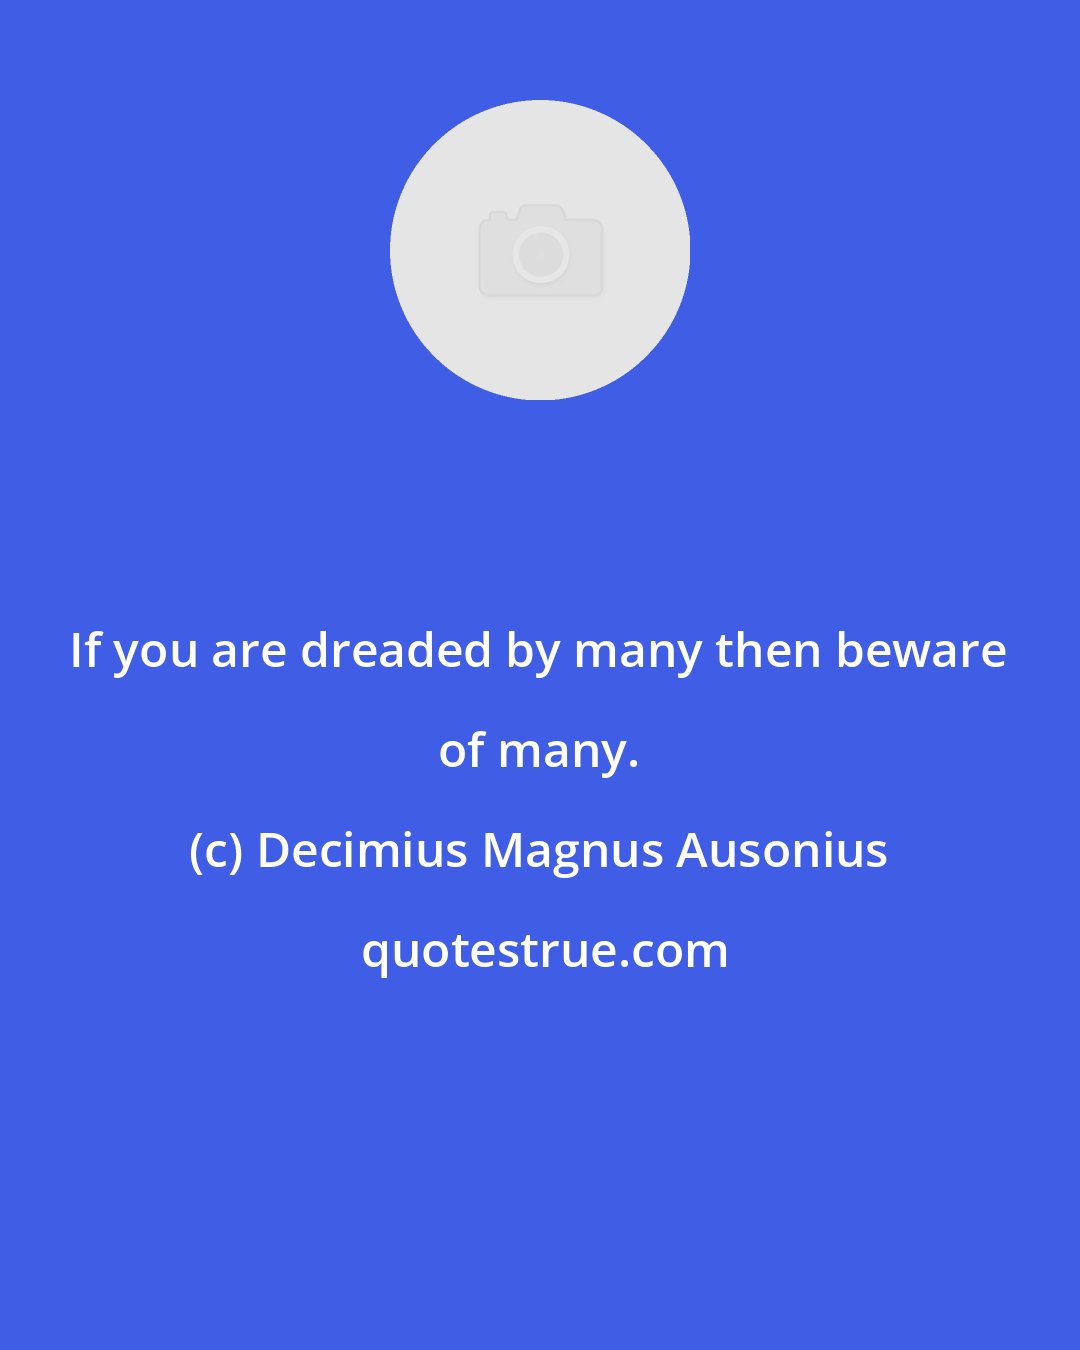 Decimius Magnus Ausonius: If you are dreaded by many then beware of many.